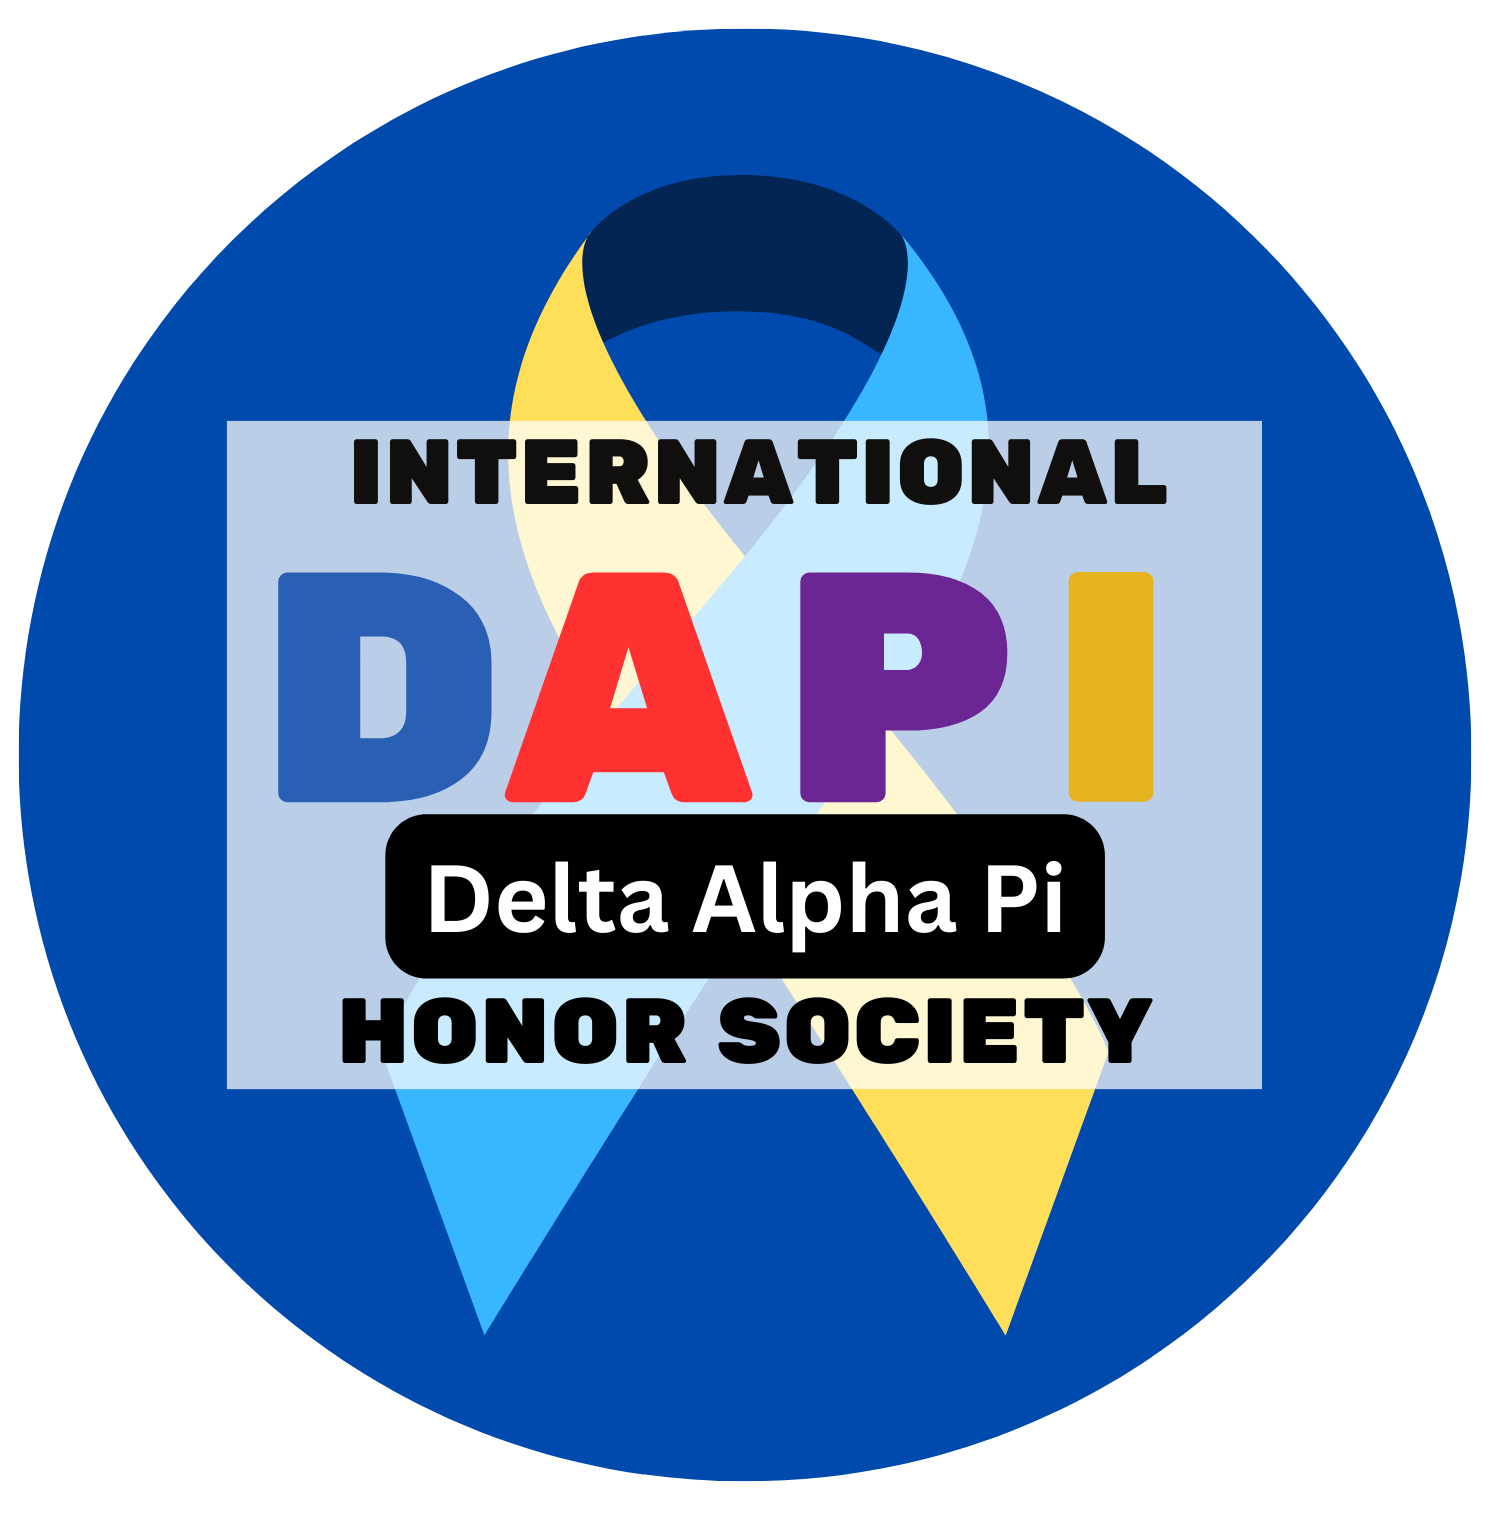 Logo with the text "International DAPI Delta Alpha Pi Honor Society" over a light blue and yellow ribbon with a royal blue background.